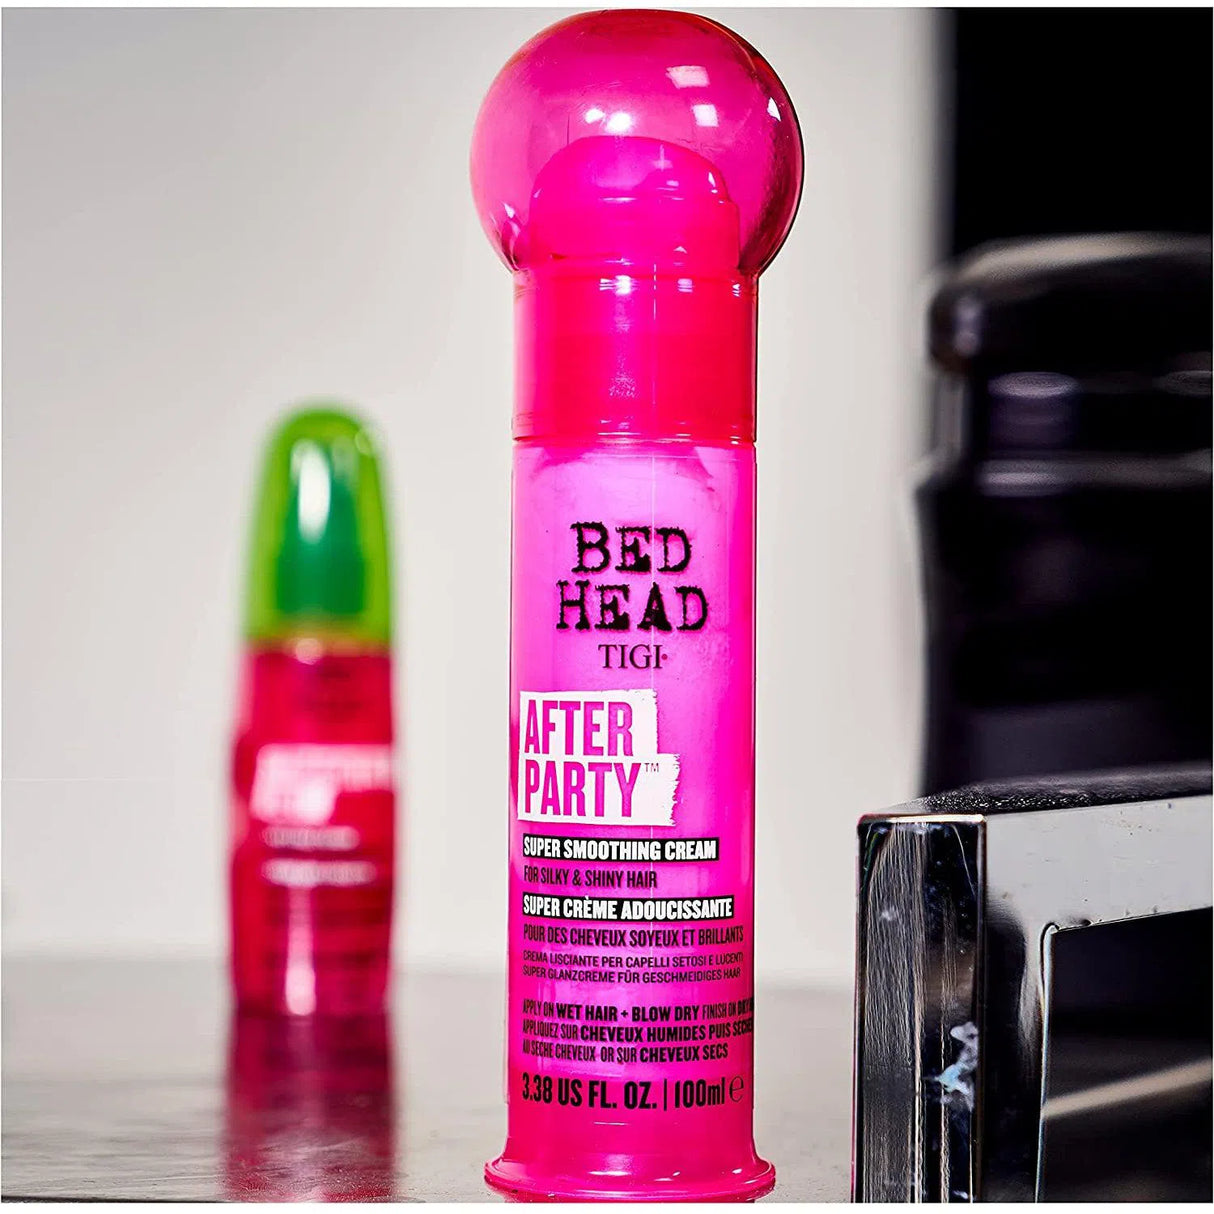 After Party Smoothing Cream-Bed Head